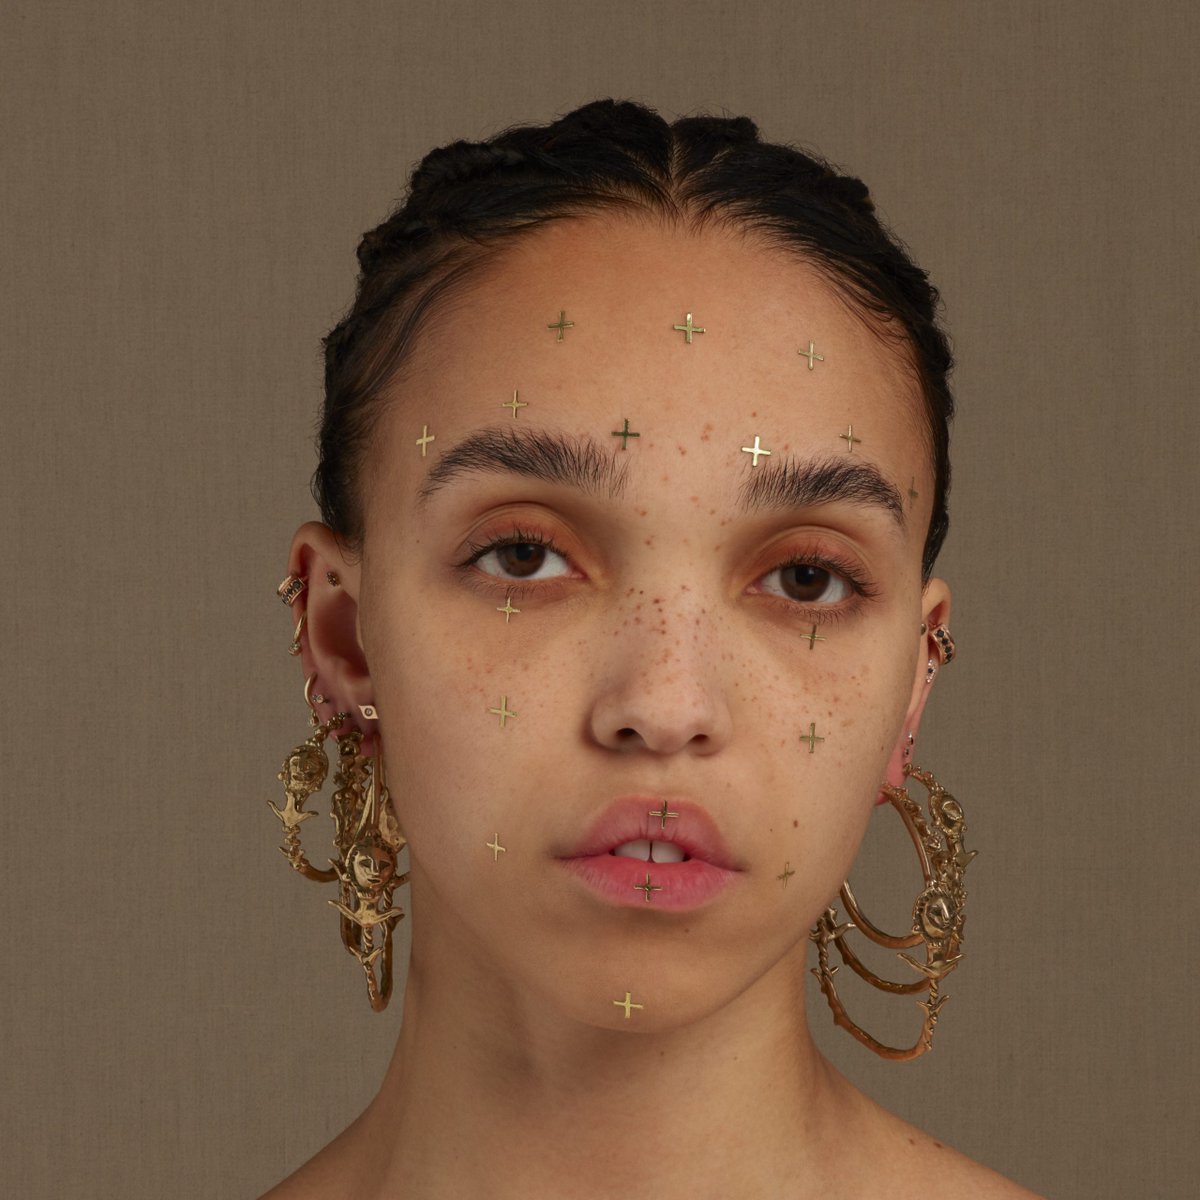 You’d notice her—“cellophane” singer @FKAtwigs comes to City Center on Apr 18, performing the 1932 solo dance piece “Satyric Festival Song” as part of the annual Martha Graham Dance Company Gala. Tickets are available at NYCityCenter.org.